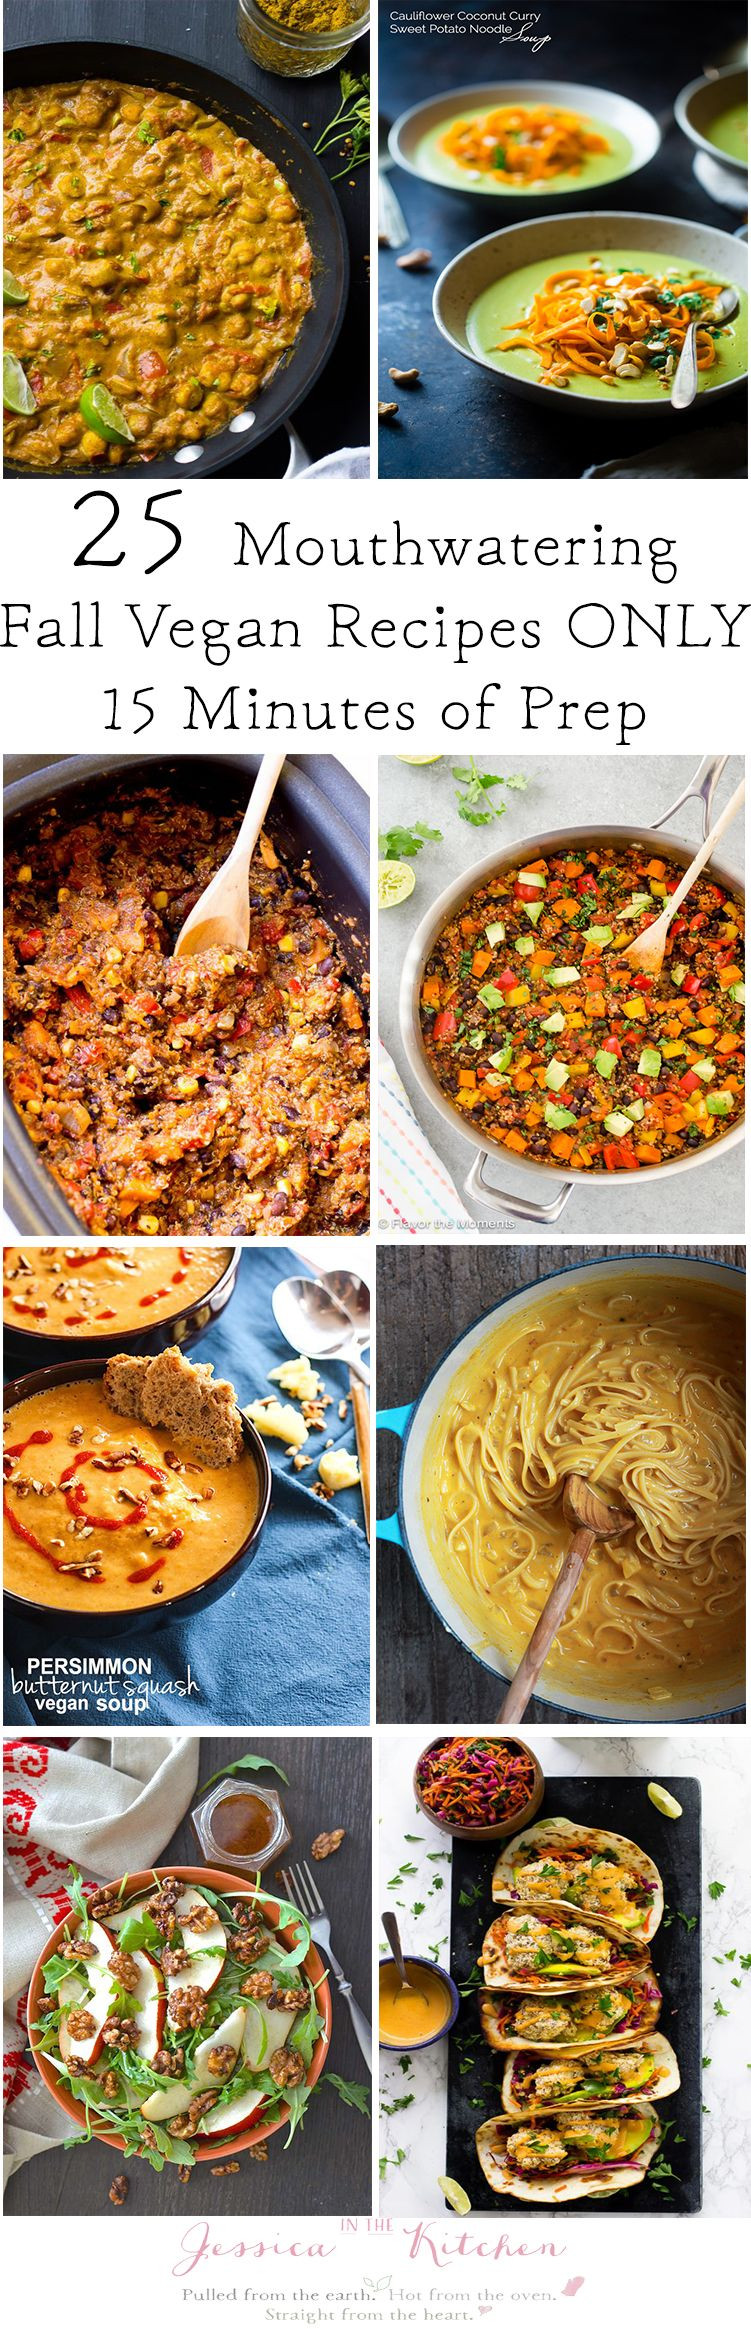 Vegetarian Fall Dinner Recipes
 25 Mouthwatering Fall Vegan Dinner Recipes You Can Prep in